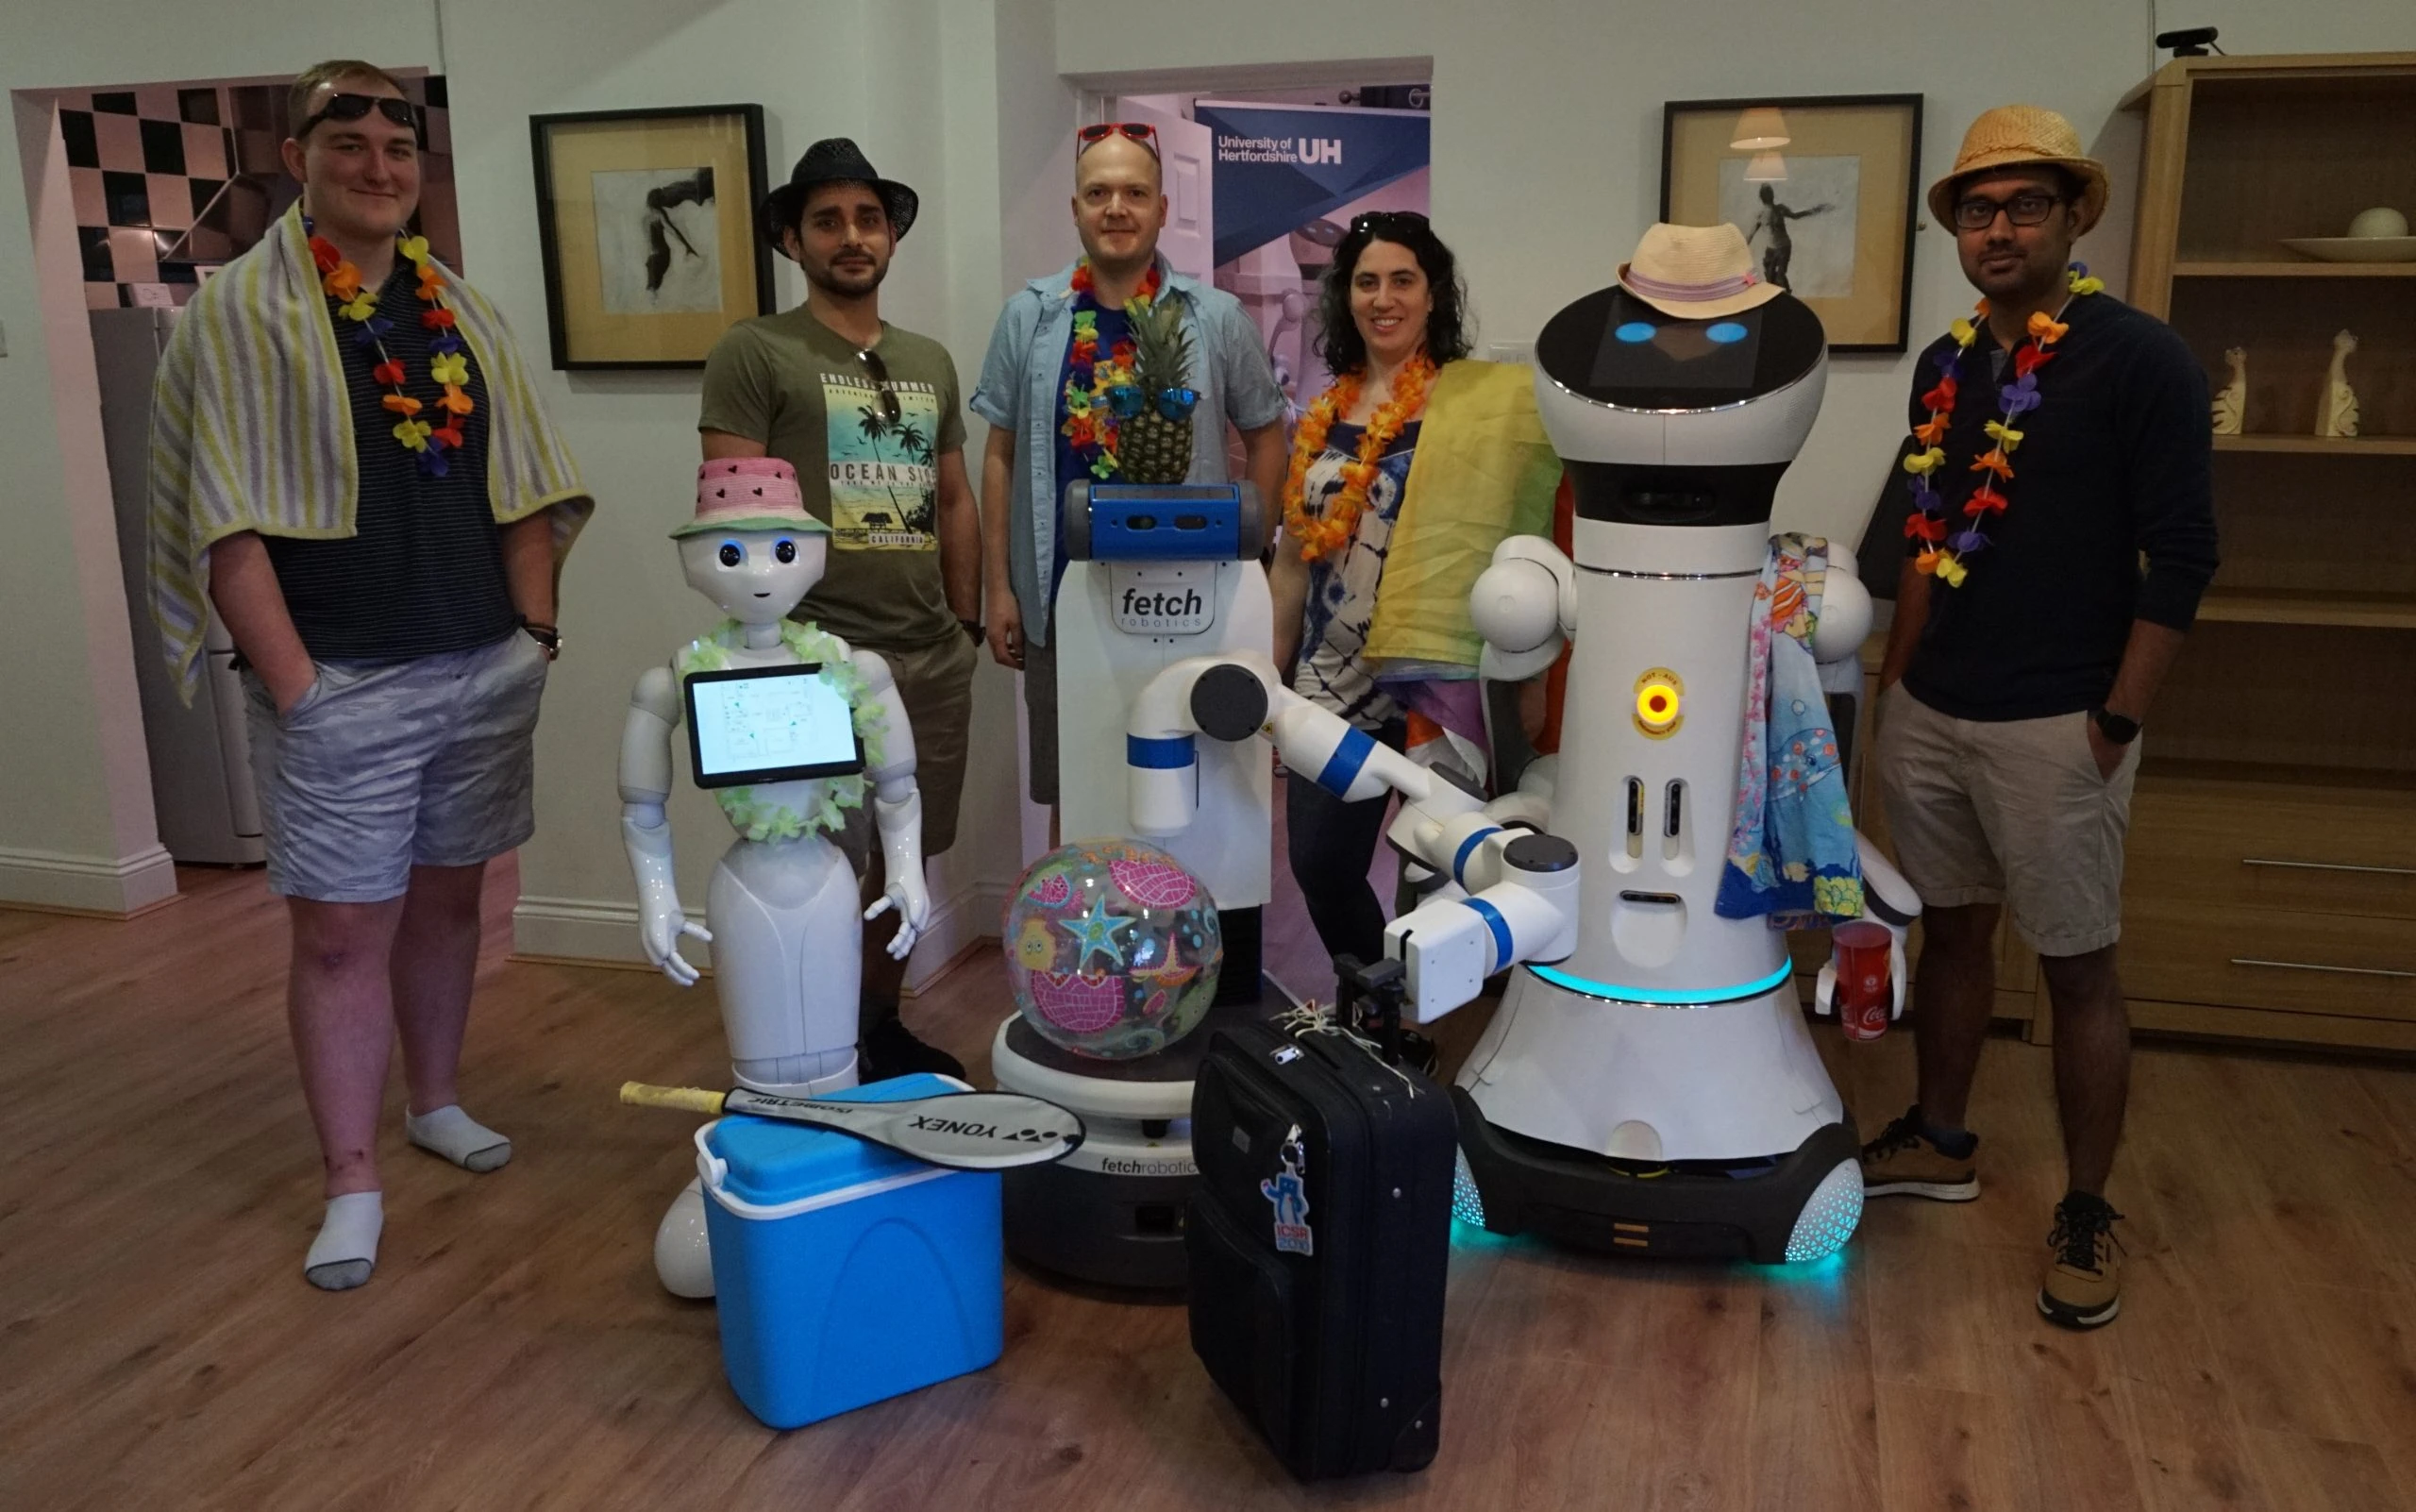 The Robot House team at Robot Lab Live